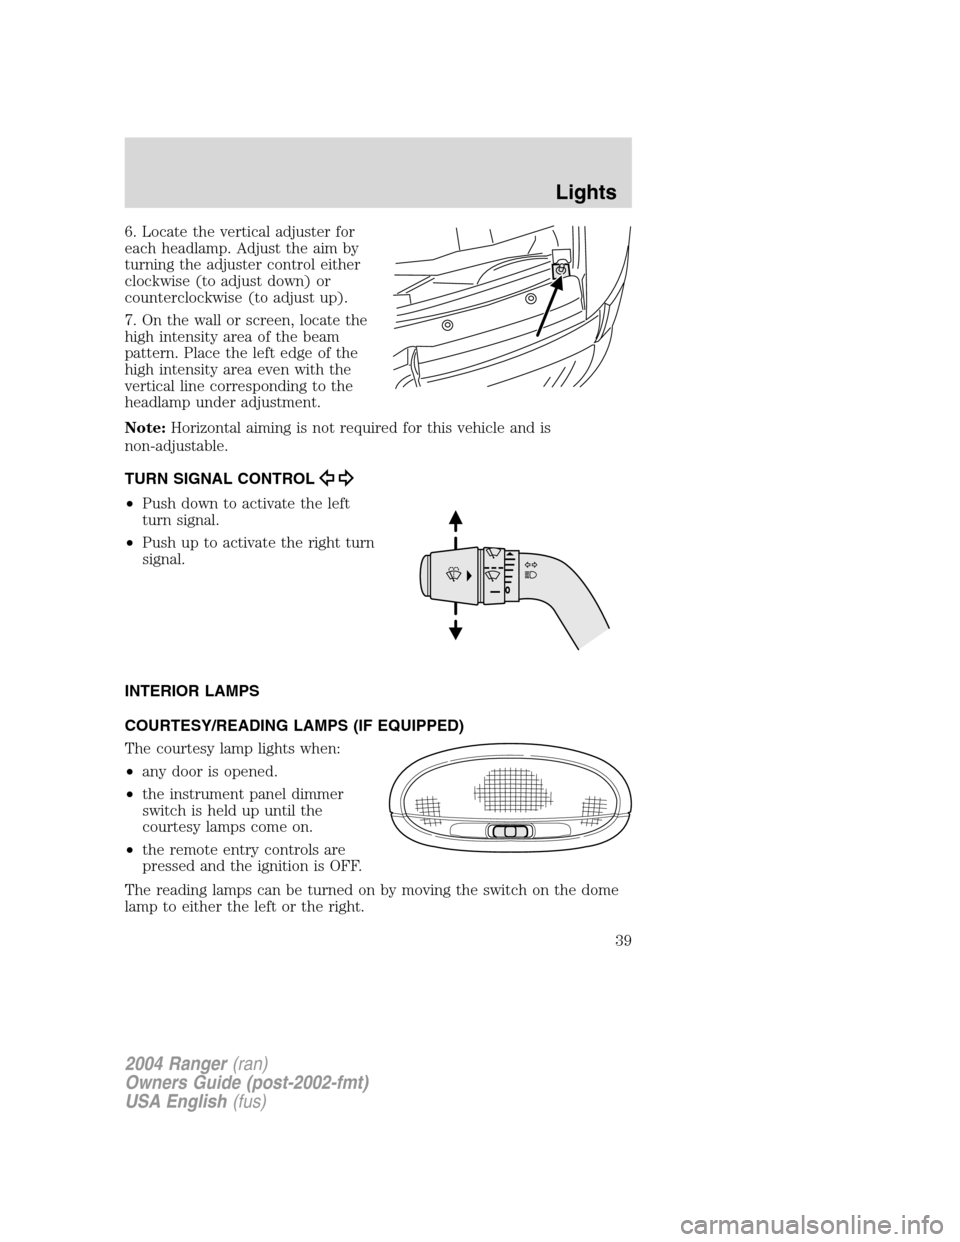 FORD RANGER 2004 2.G Owners Manual 6. Locate the vertical adjuster for
each headlamp. Adjust the aim by
turning the adjuster control either
clockwise (to adjust down) or
counterclockwise (to adjust up).
7. On the wall or screen, locate